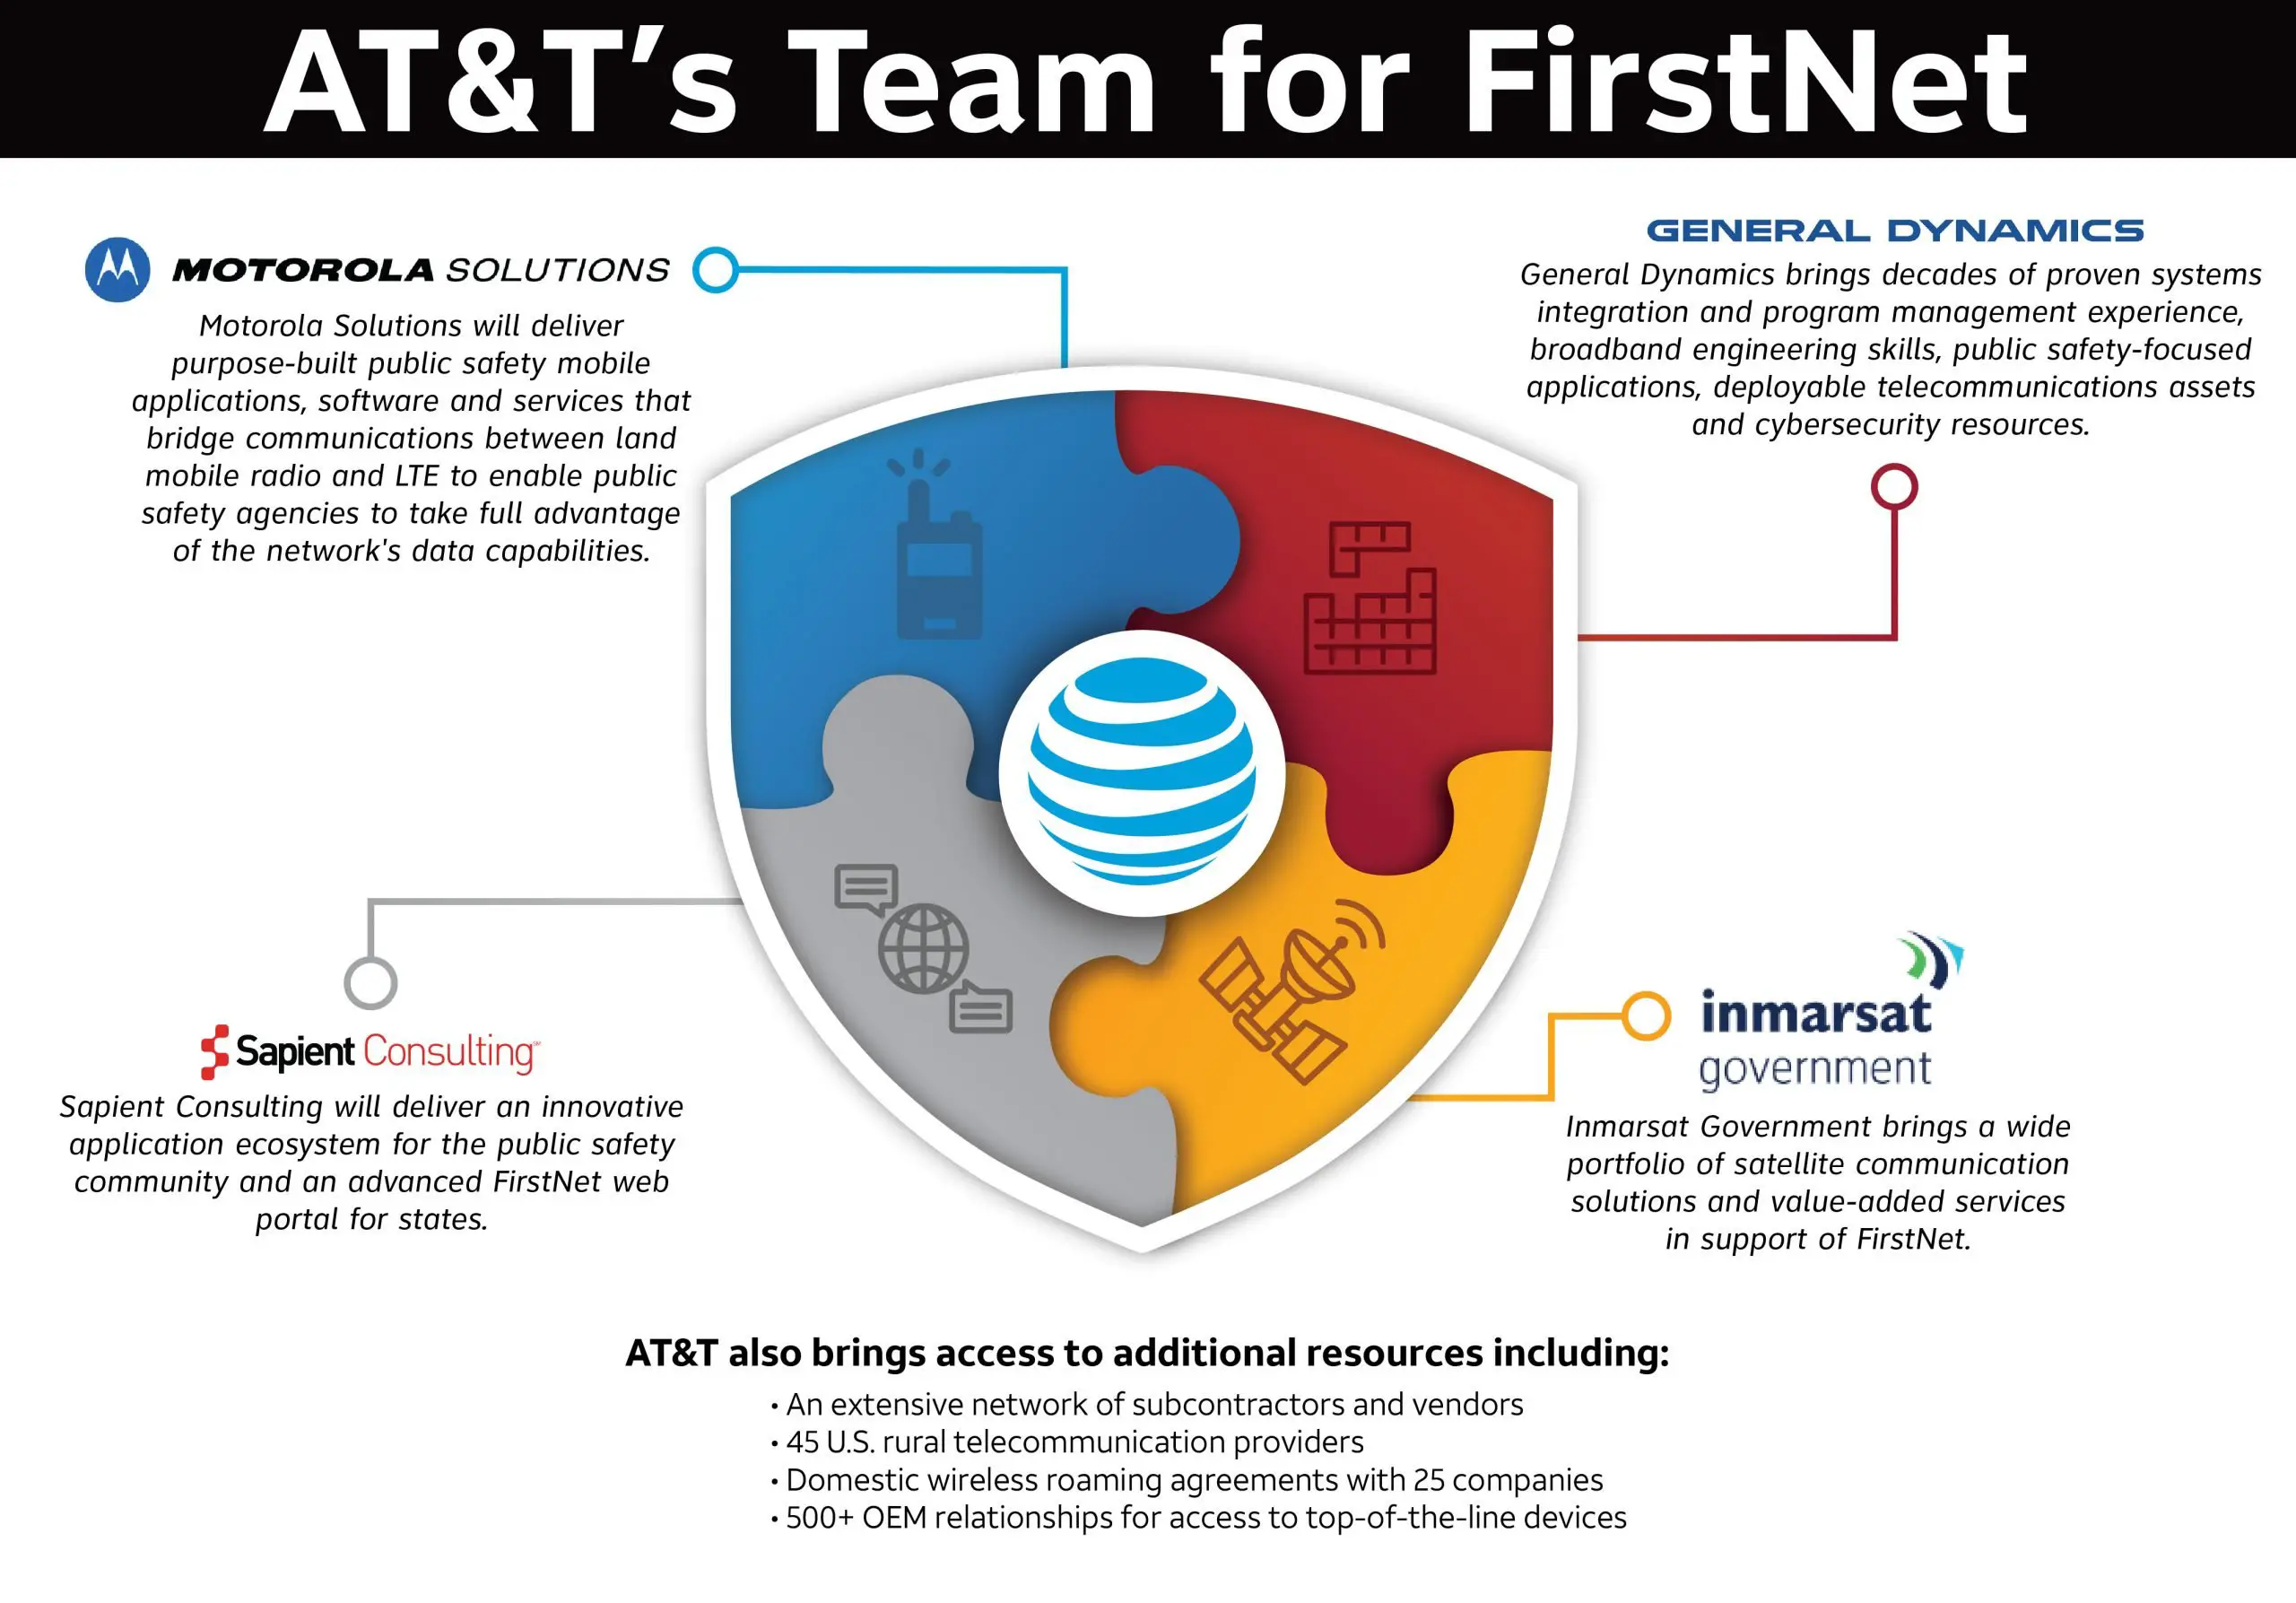 Teaming to Make FirstNet a Reality